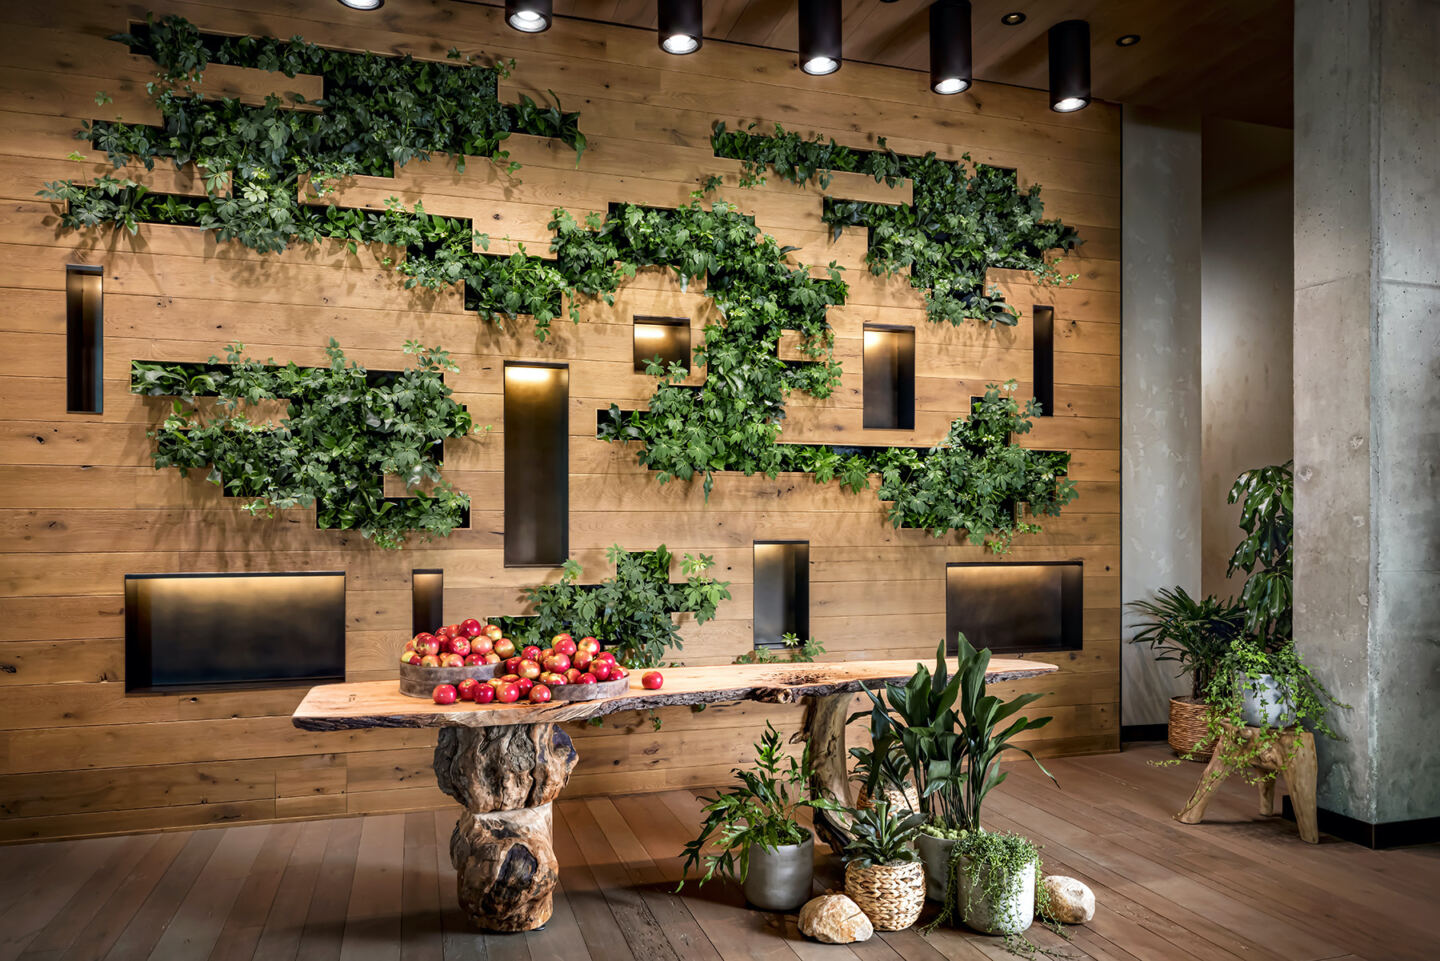 The living wall at 1 Hotel Toronto, a biophilic hotel that celebrates the beauty of Toronto’s natural environment